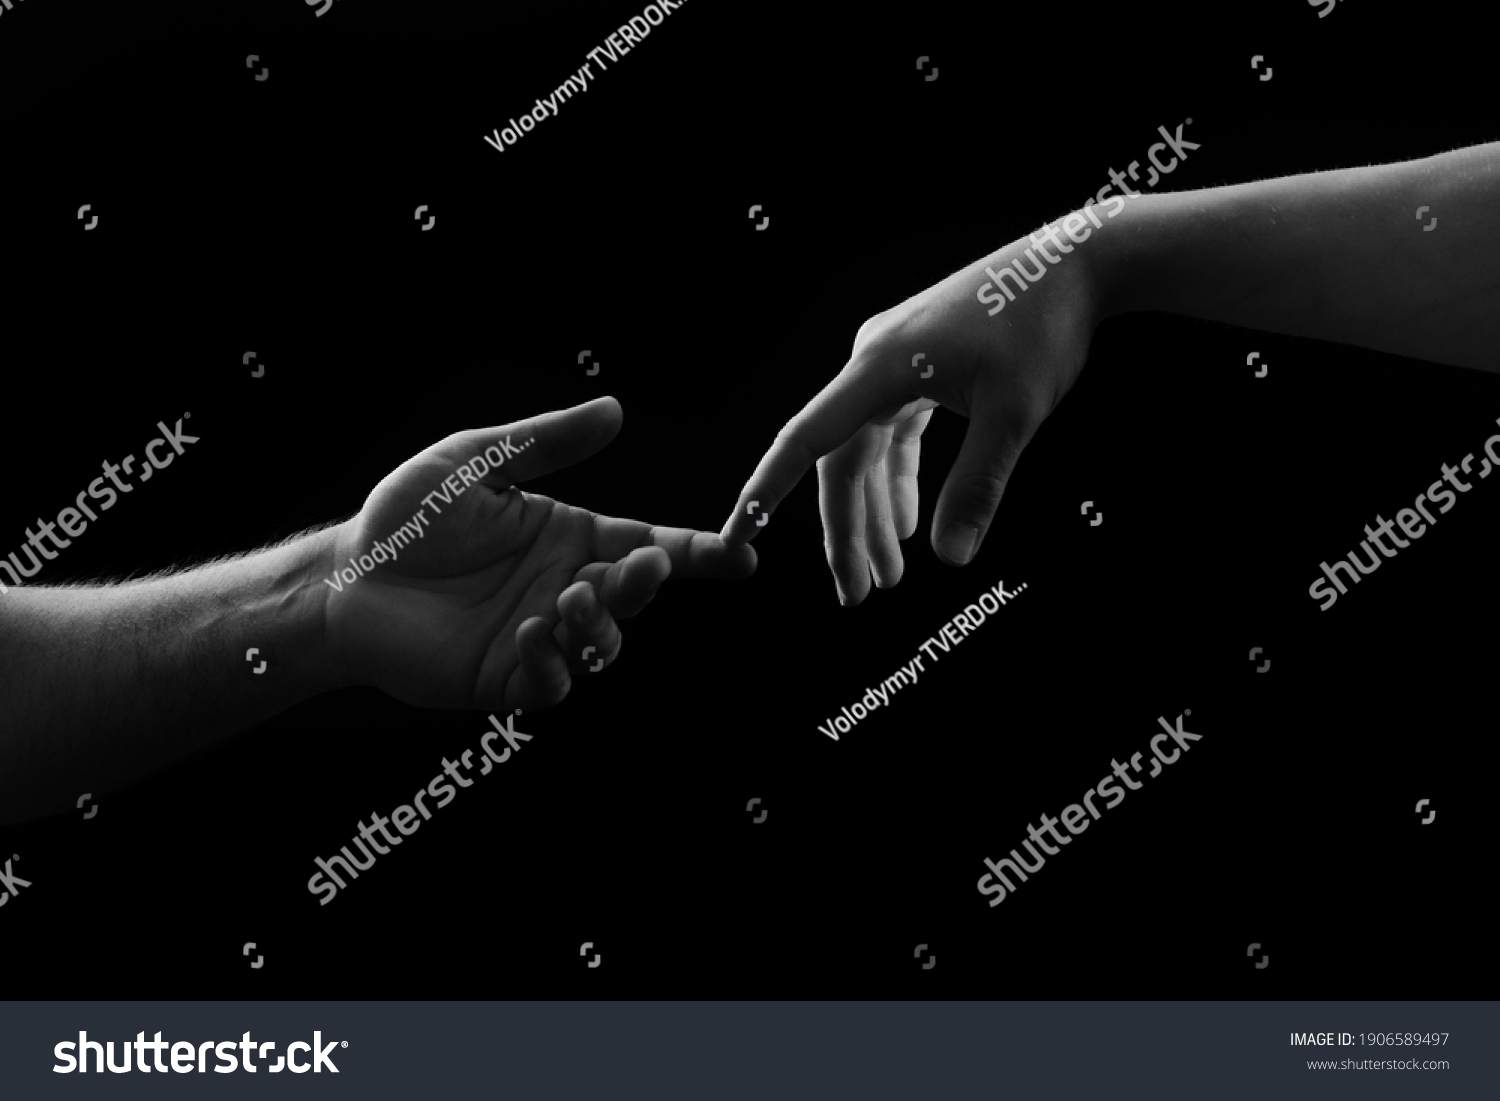 Sensual Hand Couple Giving Helping Hand Stock Photo Shutterstock